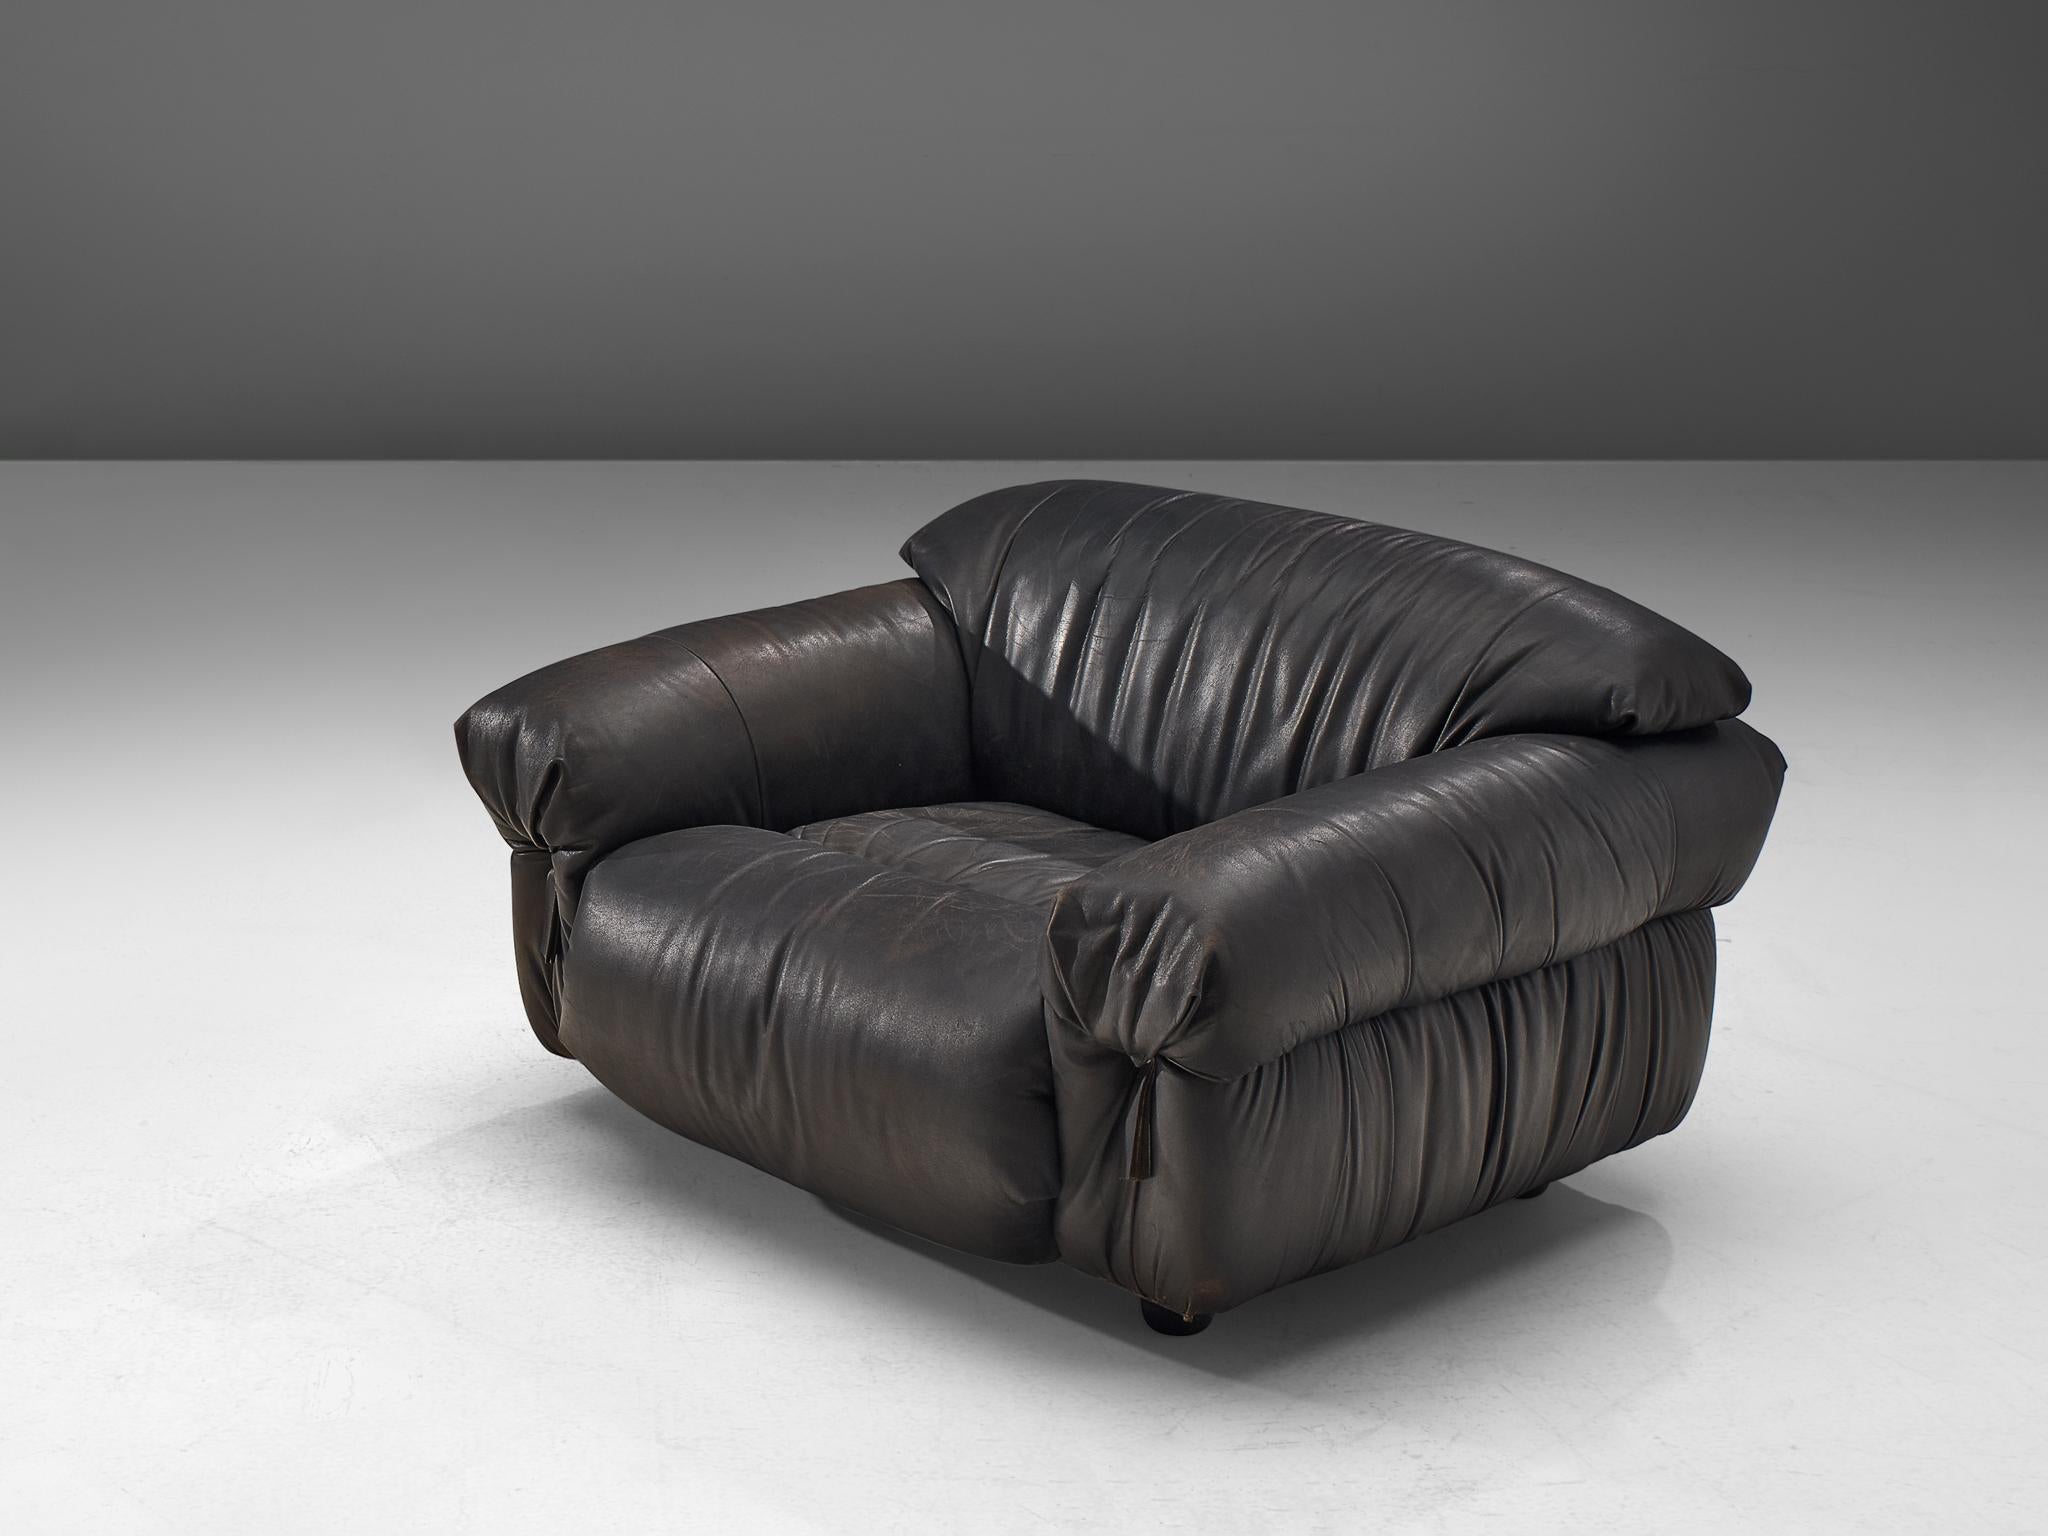 Lounge chair, leather, Italy, 1970s.

Grand and bulky lounge chair. Completely covered in high-quality, thick leather that patinated beautiful over the years. The draped and folded leather is finished with leather straps at the front of the